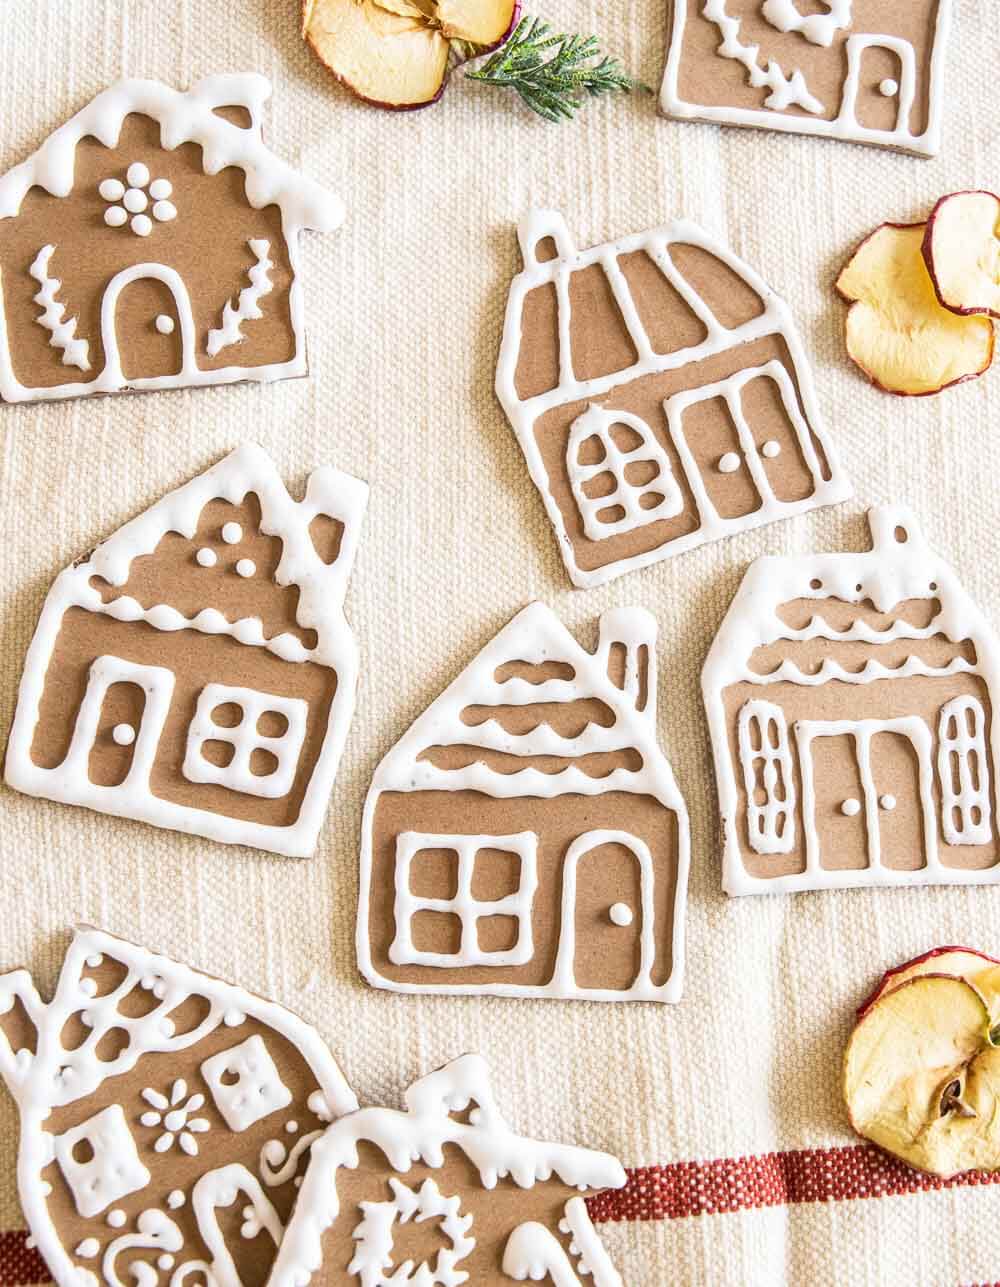 Gingerbread Puffy Paint Recipe